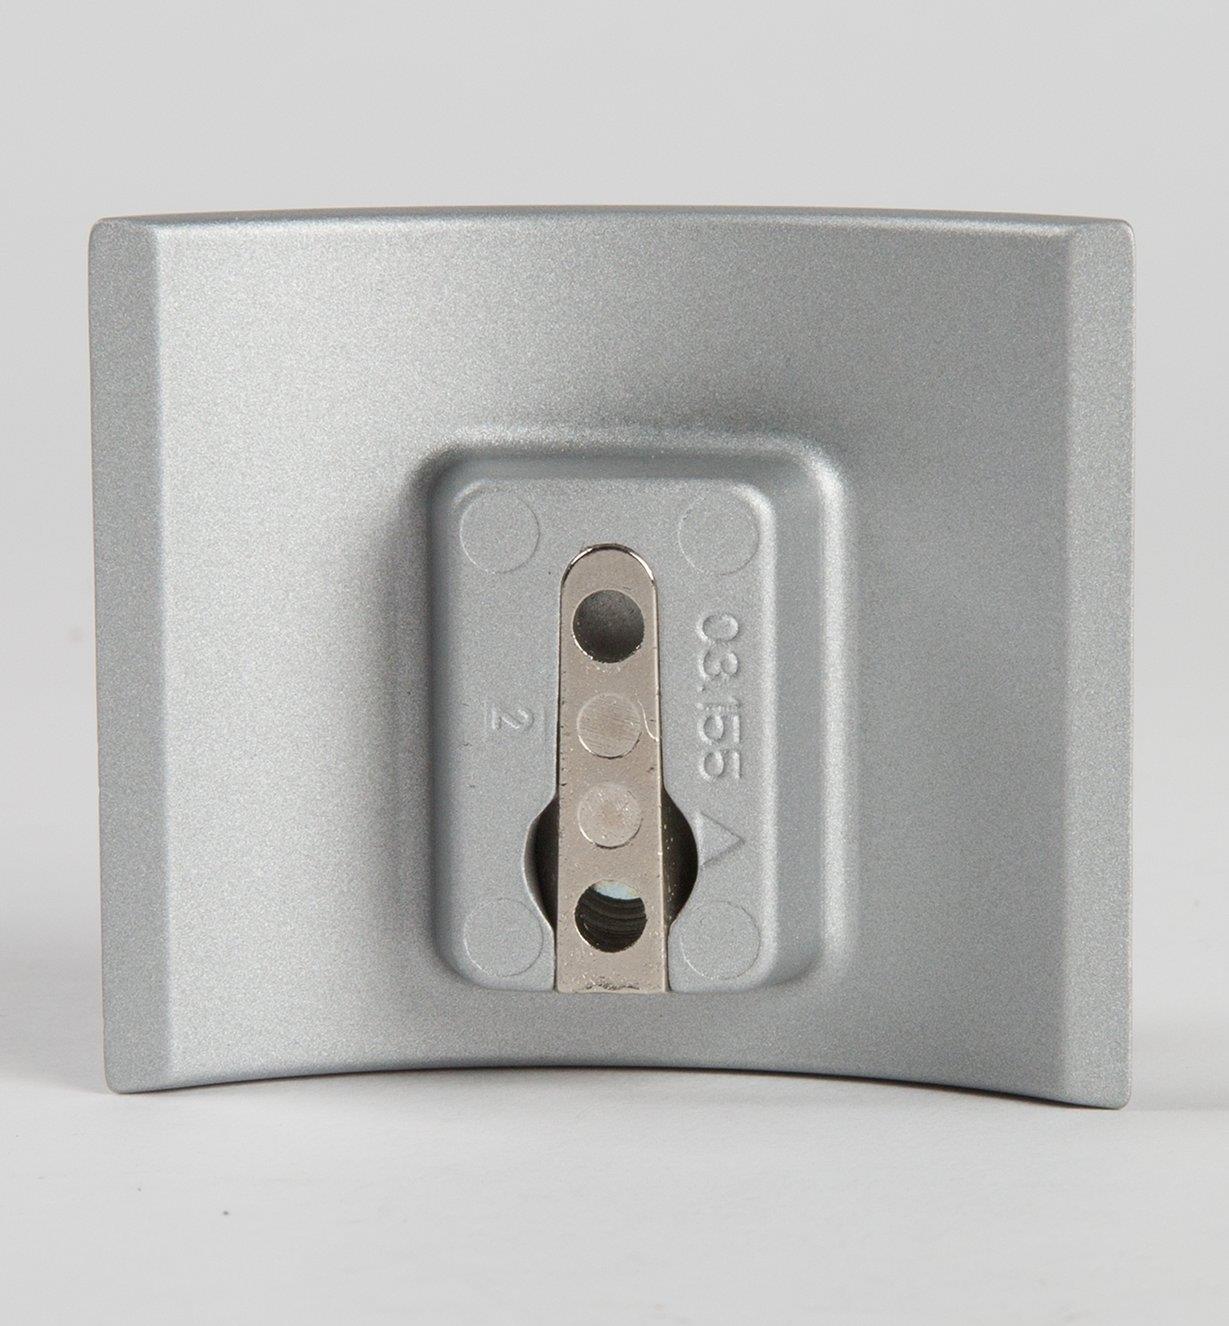 Back view of matte chrome hook showing mounting bracket